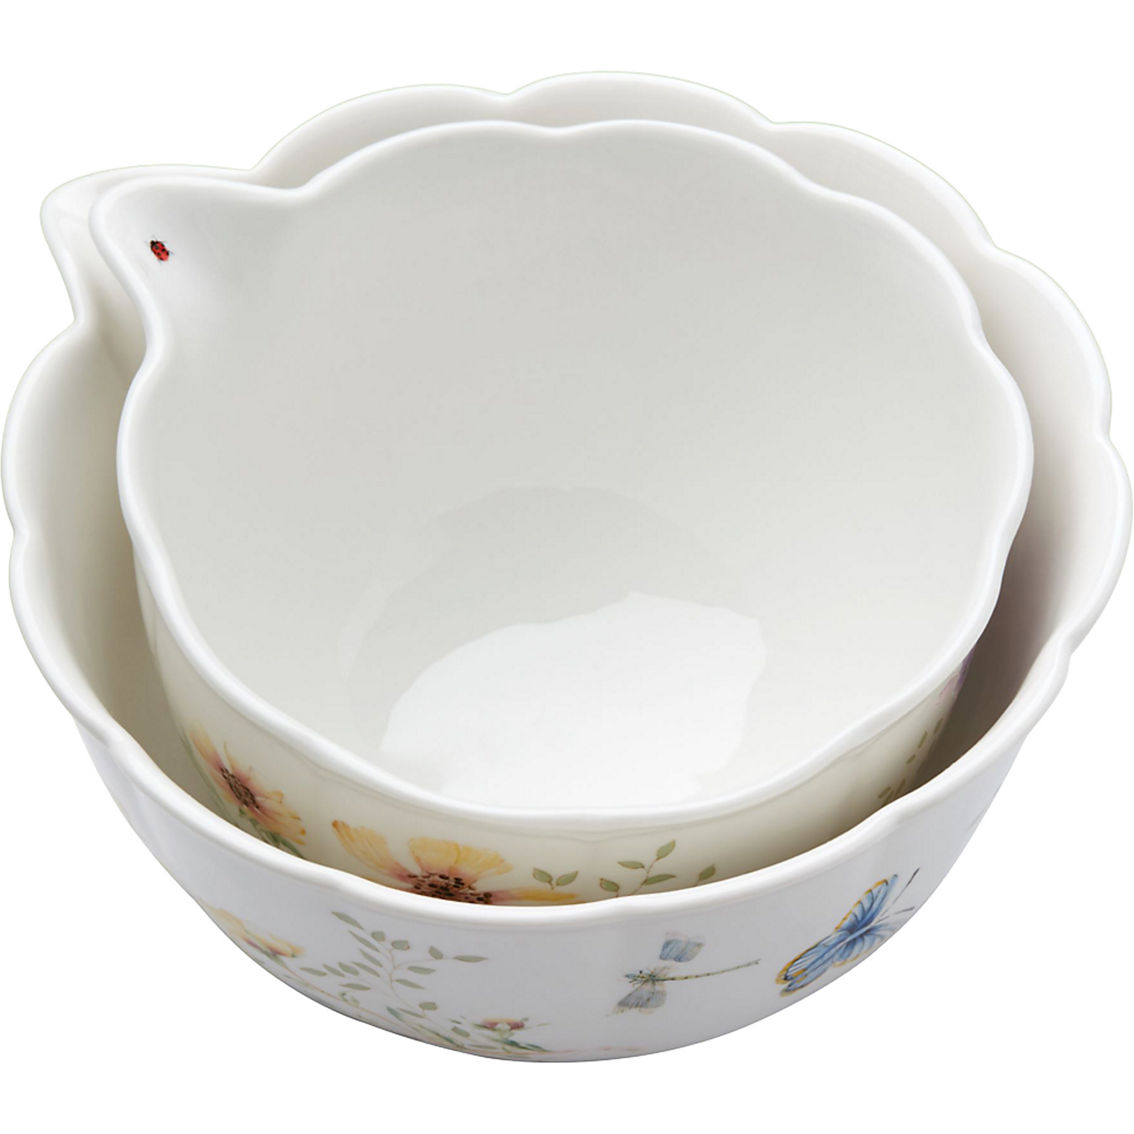 Lenox Butterfly Meadow Nesting Bowl 2 pc. Set - Image 2 of 2